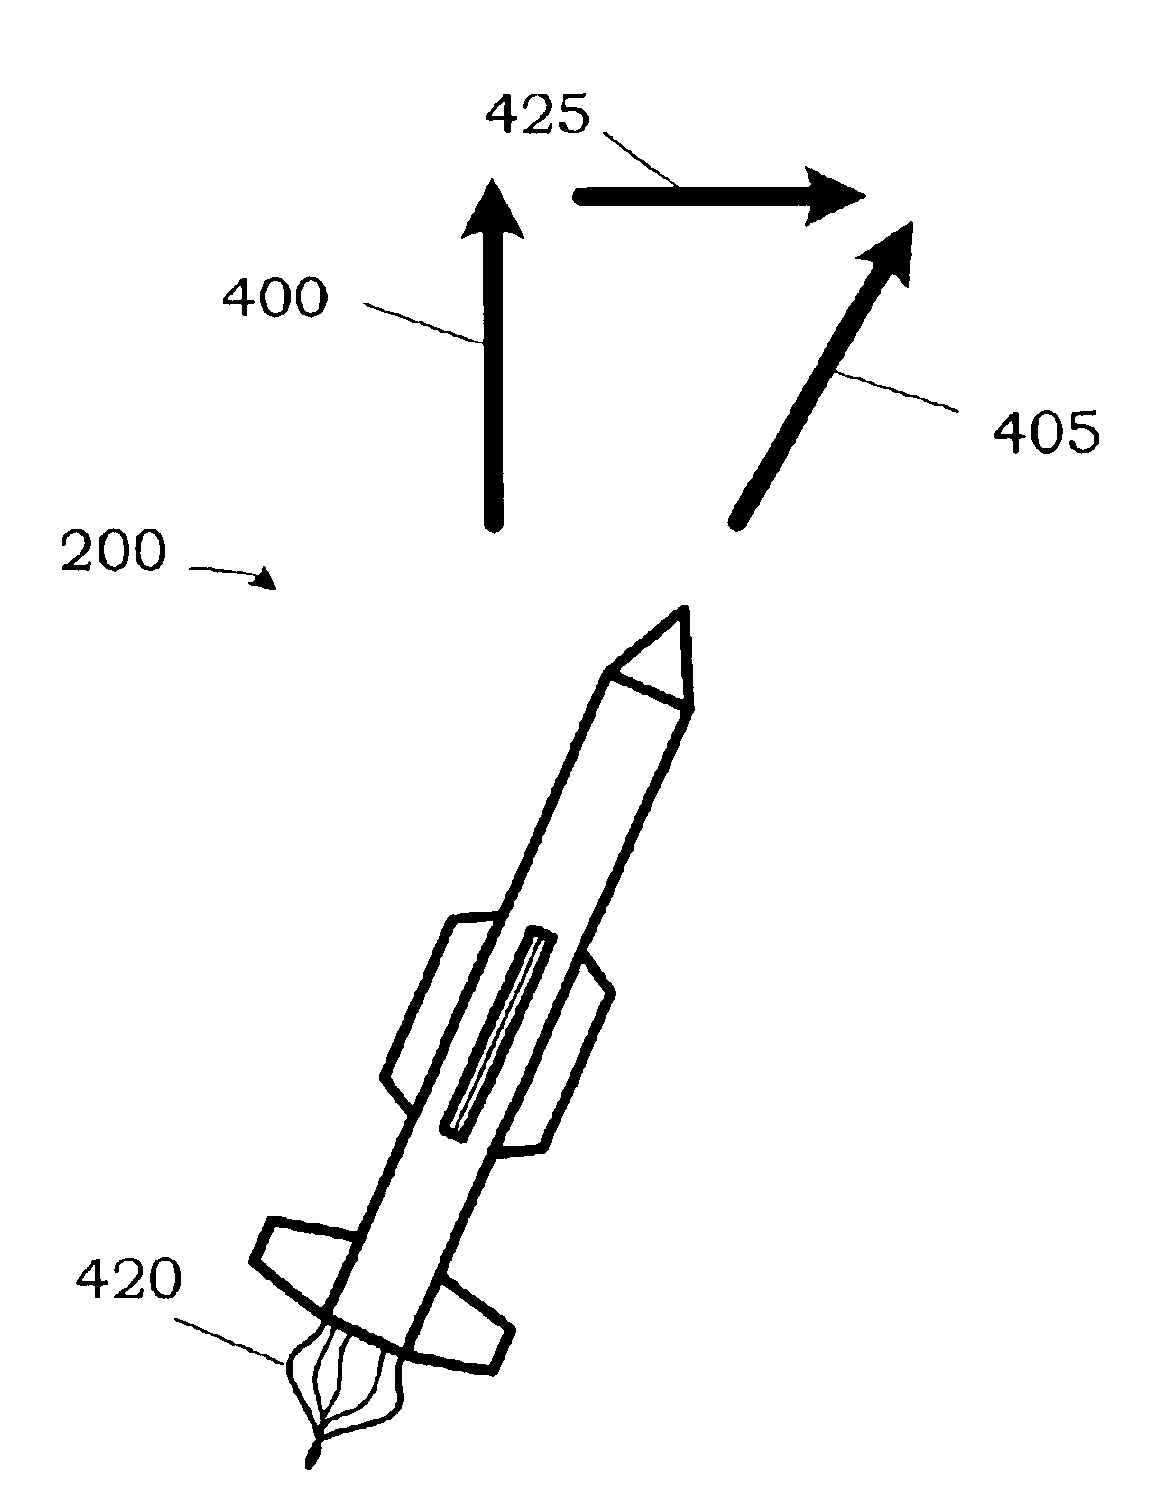 Thrust vectoring a flight vehicle during homing using a multi-pulse motor